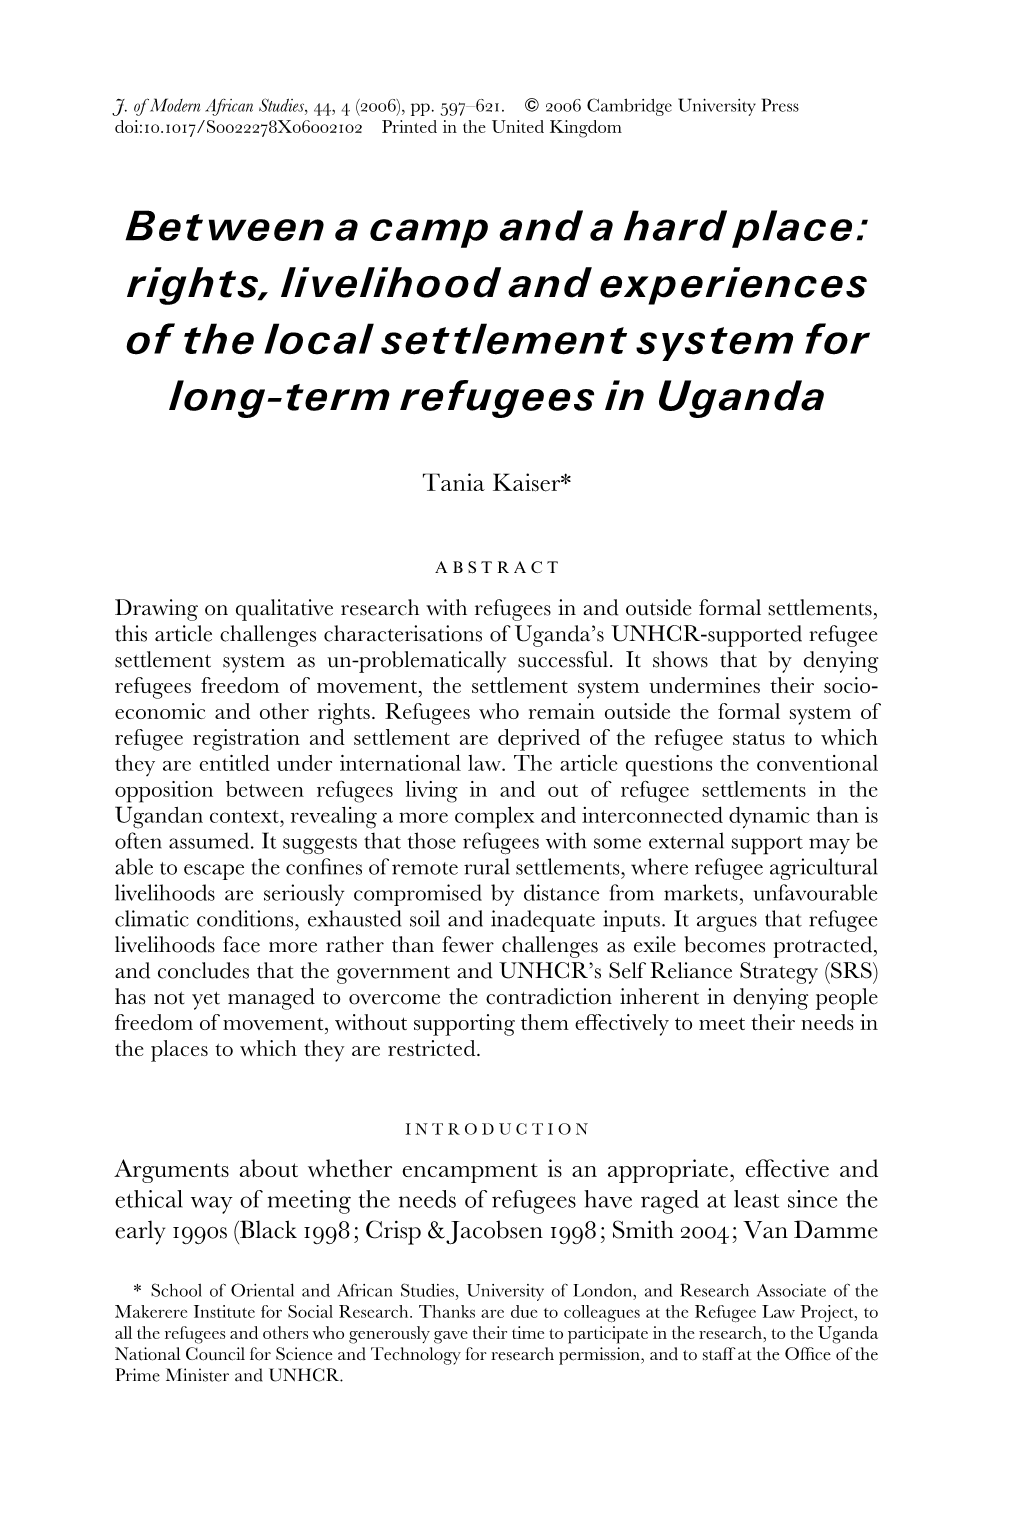 Between a Camp and a Hard Place: Rights, Livelihood and Experiences of the Local Settlement System for Long-Term Refugees in Uganda